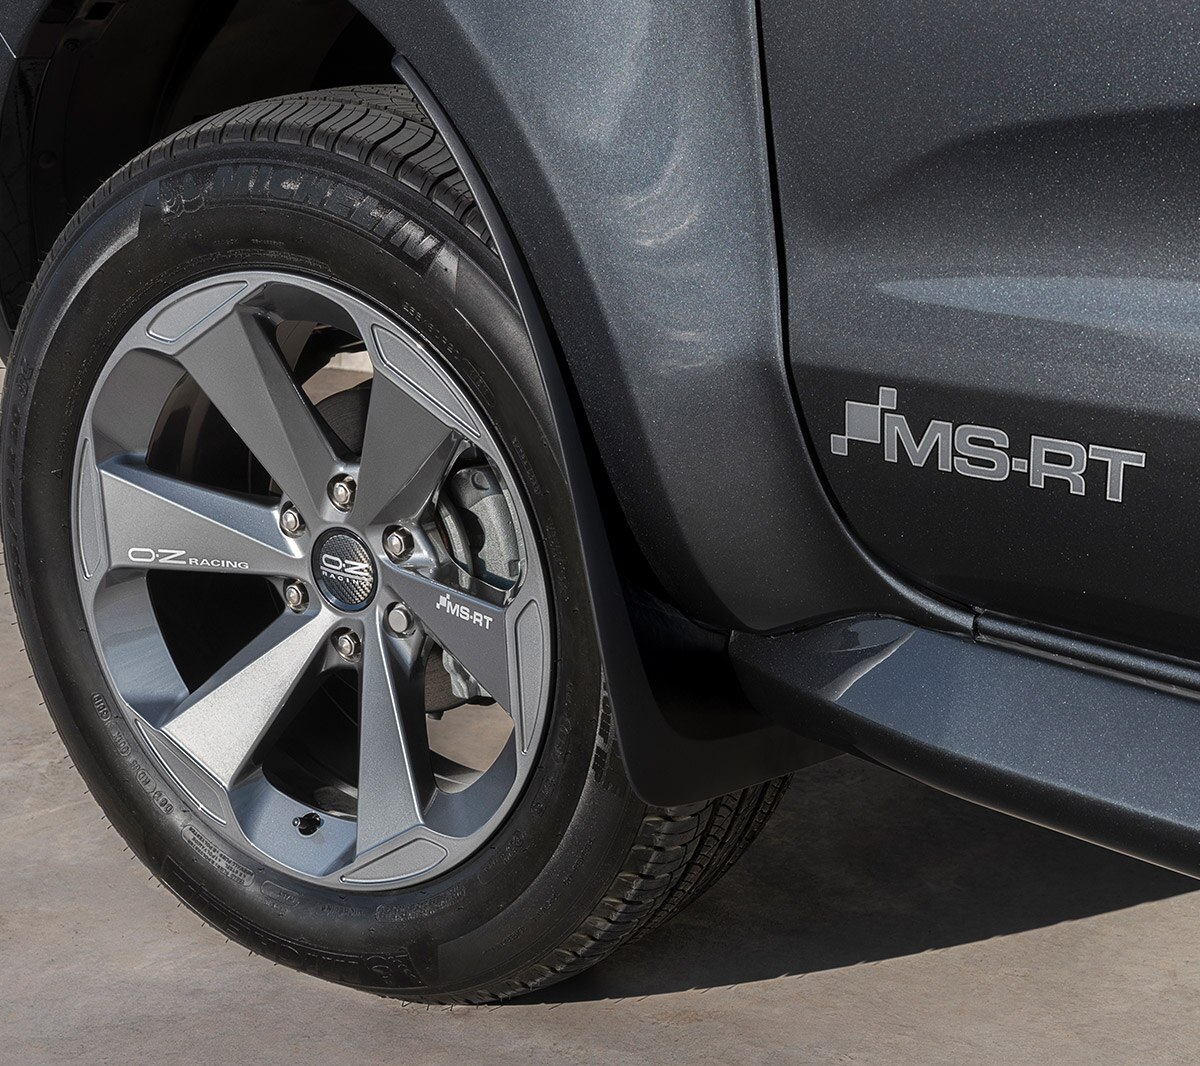 Ford Ranger MS-RT OZ racing alloys close up